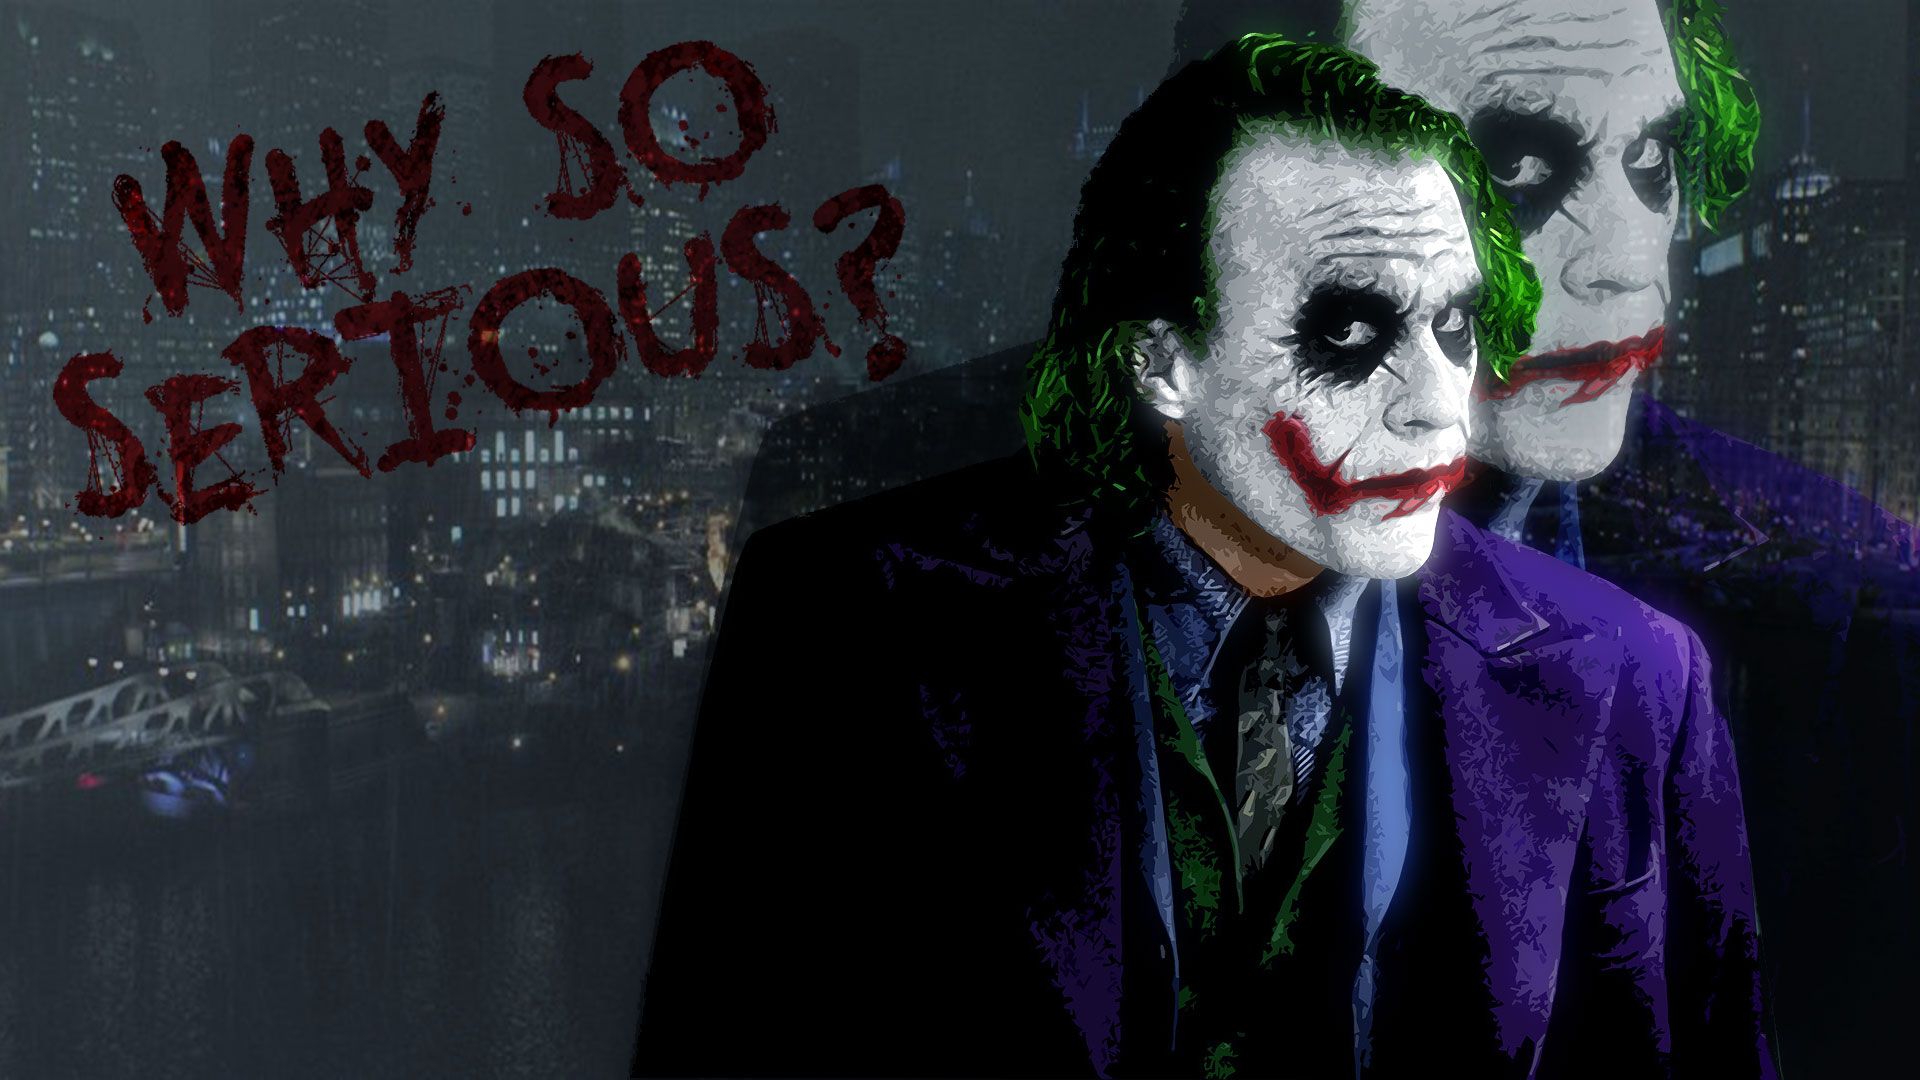 Featured image of post Why So Serious Wallpaper Hd For Laptop serious wallpaper vector wallpapers images photos and background for desktop windows 10 macos apple iphone and android mobile in hd serious wallpaper for free in different resolution hd widescreen 4k 5k 8k ultra hd wallpaper support different devices like desktop pc or laptop